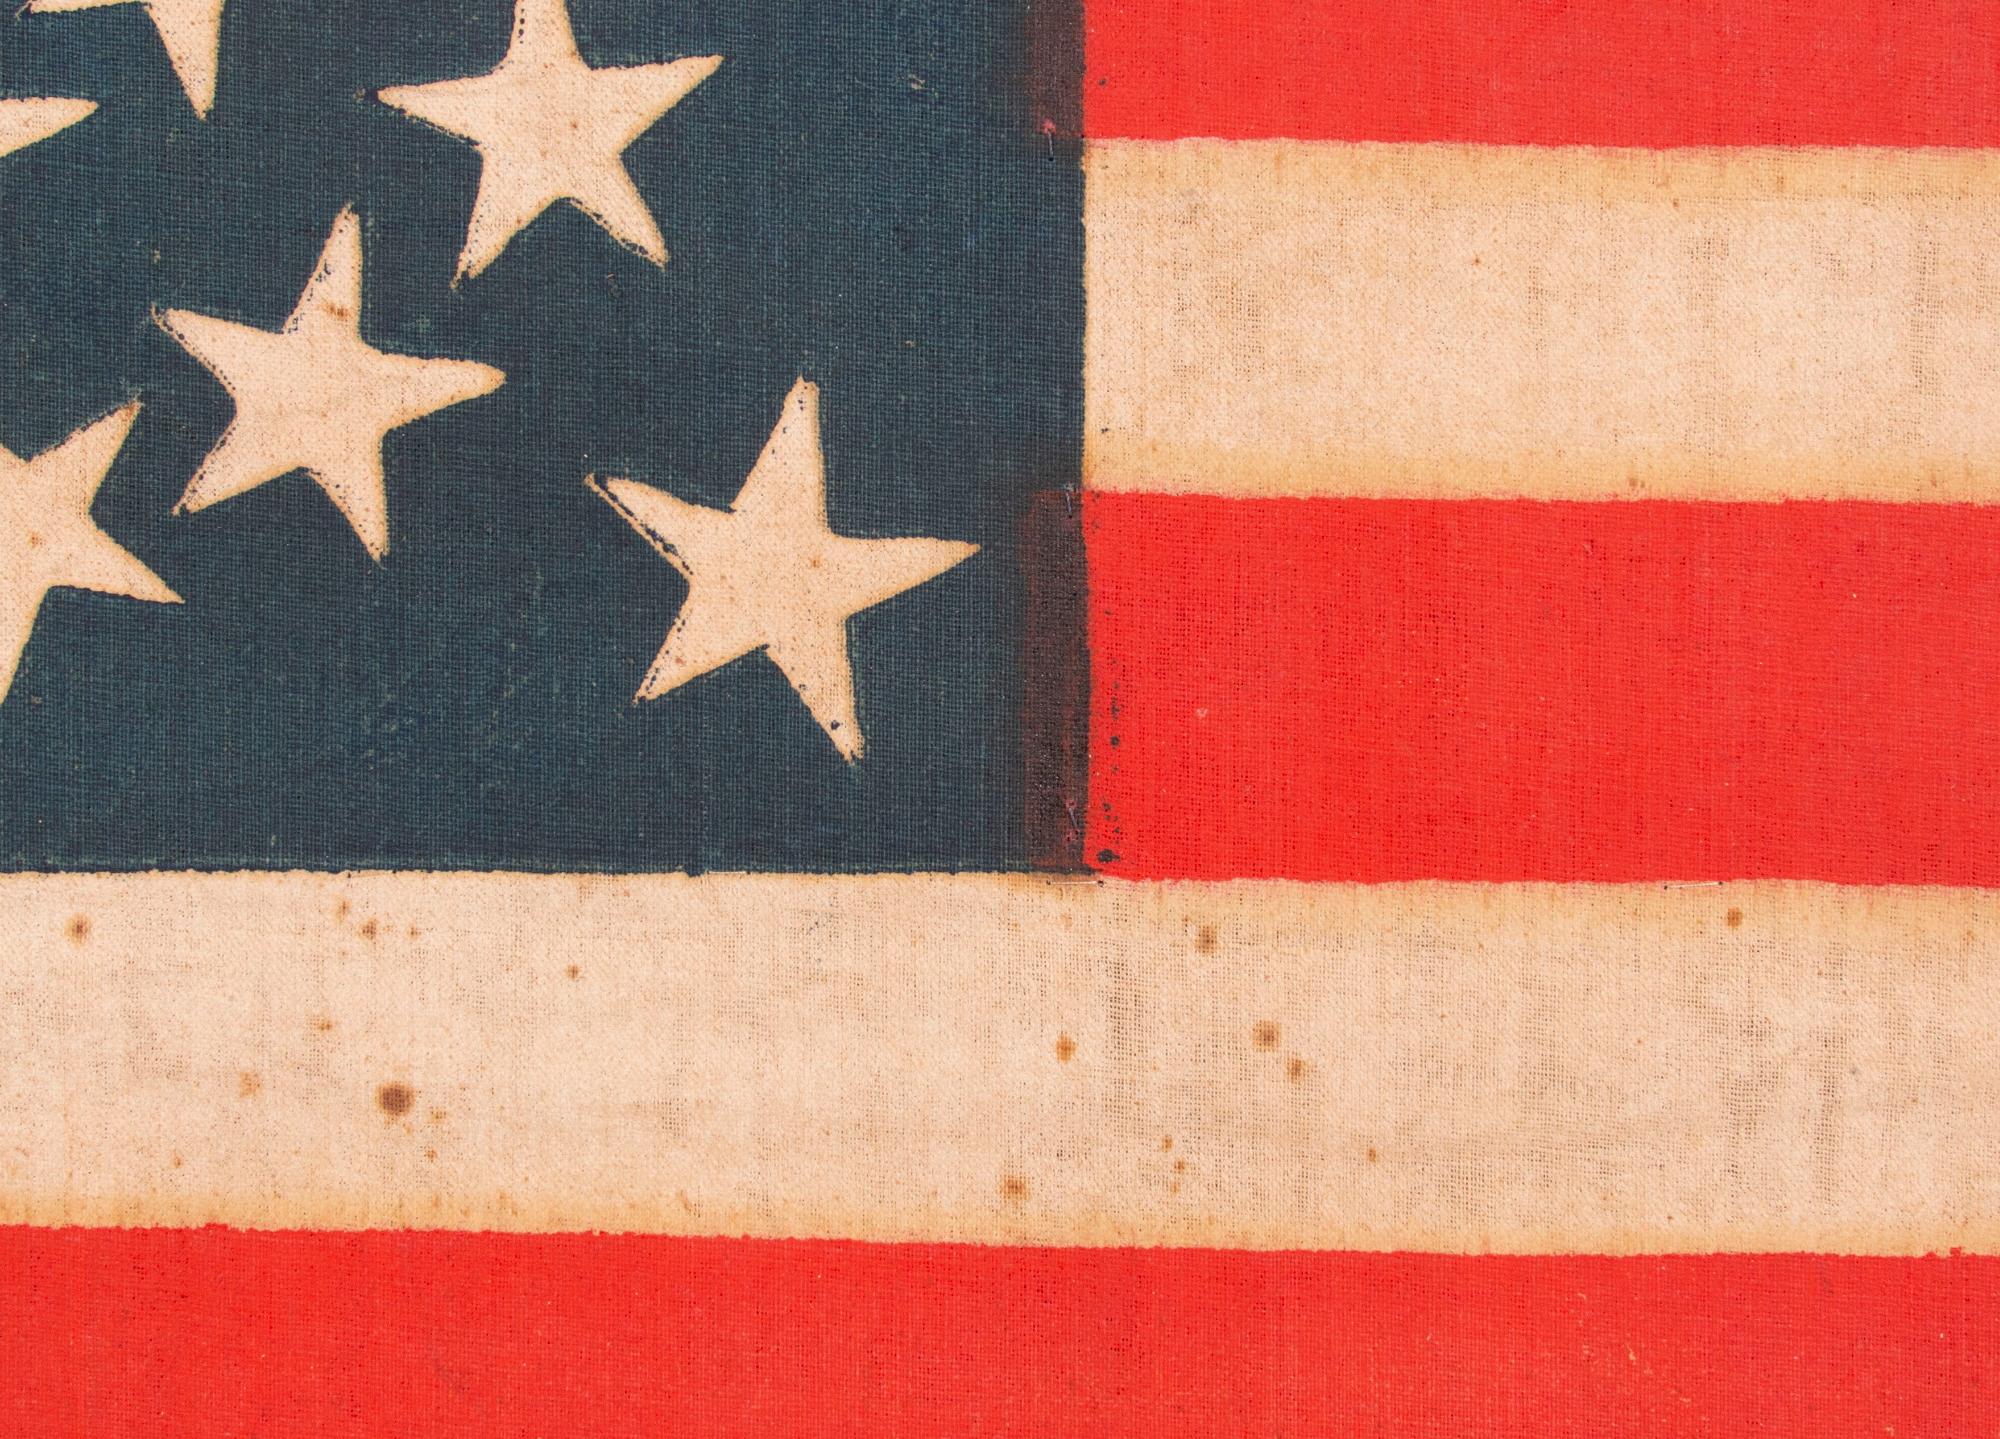 19th Century 42 Stars American Flag with Stars in a Medallion Configuration, Washington State